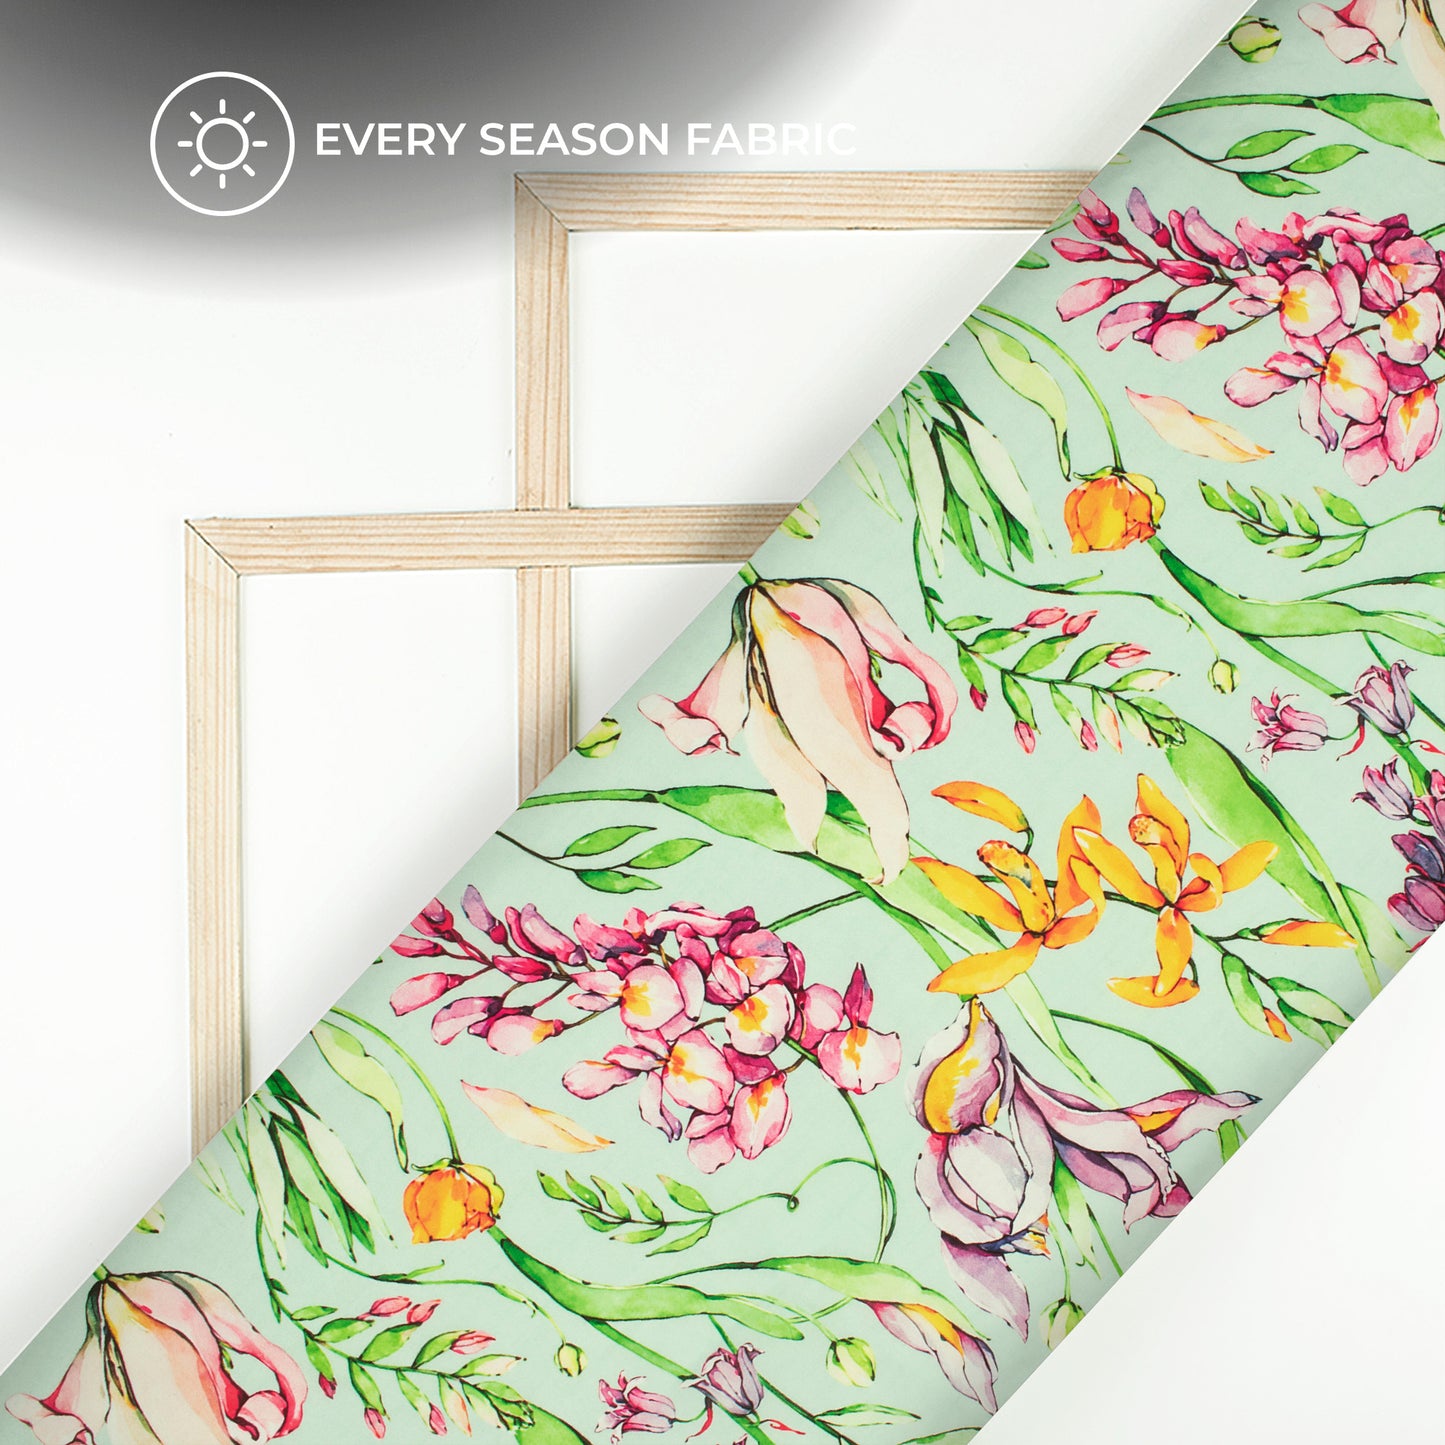 Mint Green And Pink Floral Digital Print BSY Crepe Fabric